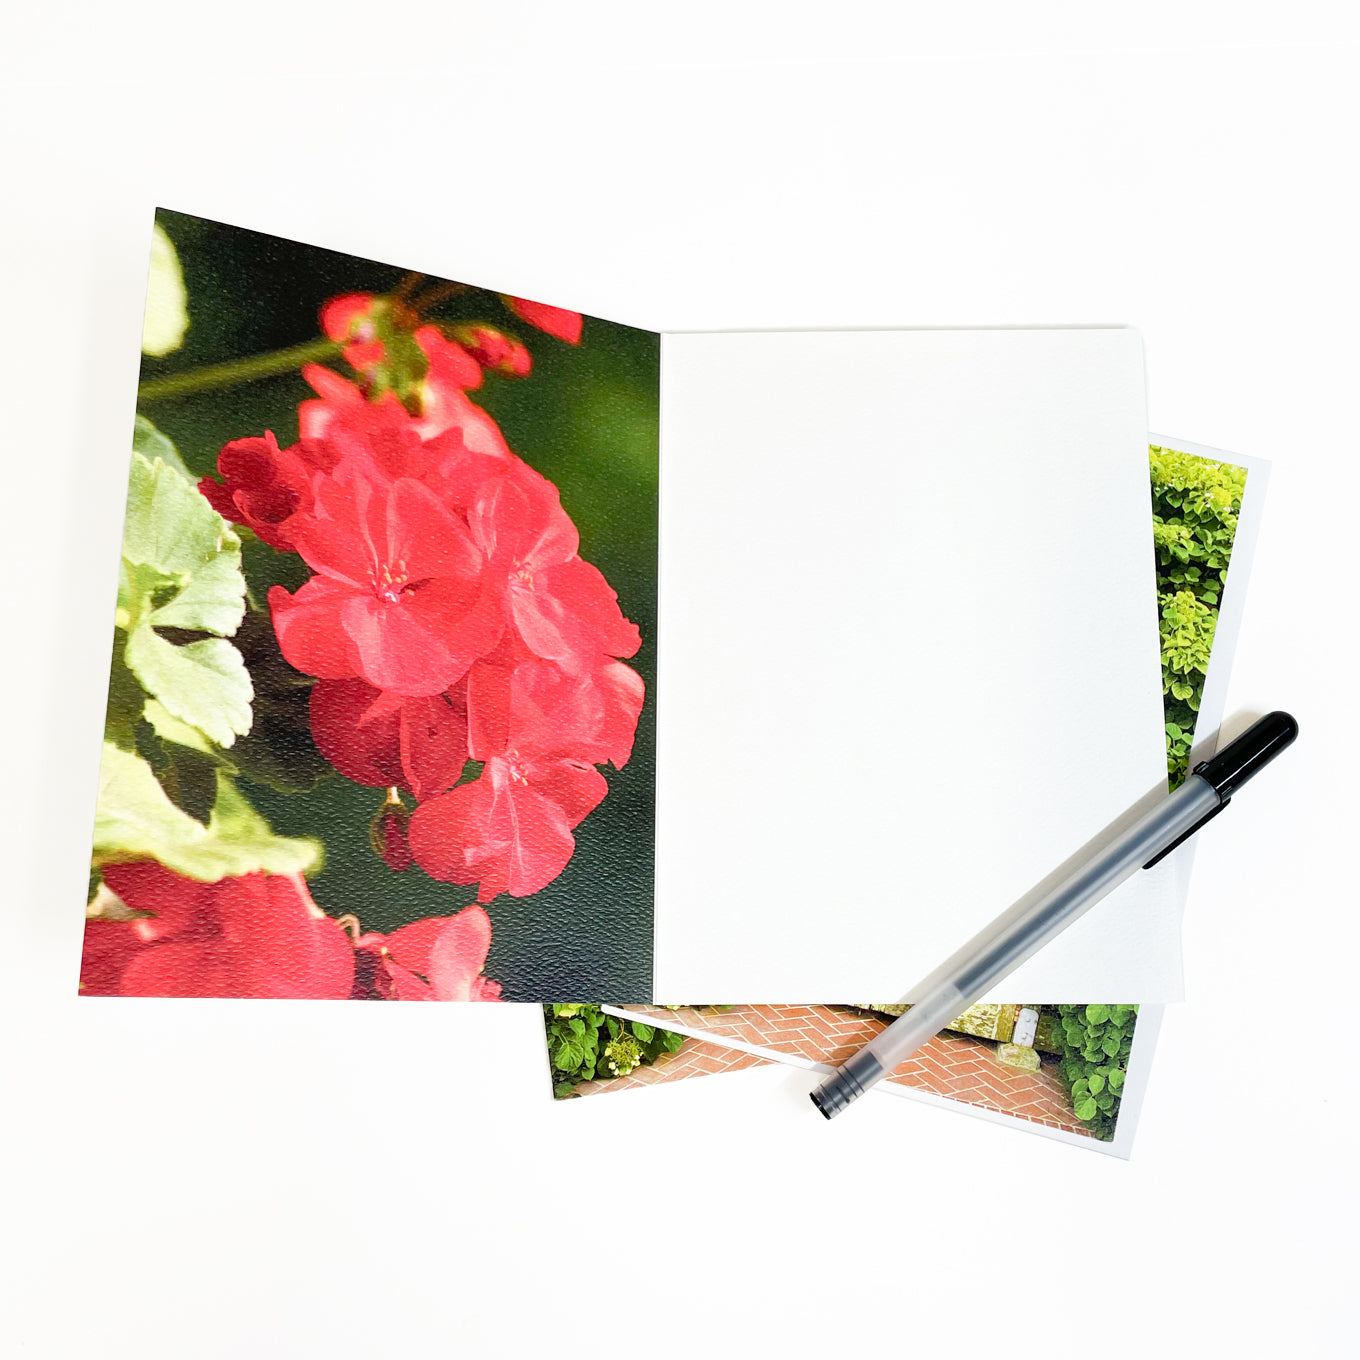 Blank greeting card featuring a photograph of a Mackinac Island cottage gate covered in geranium blooms by Michigan artist Jennifer Wohletz of Mackinac Memories.  